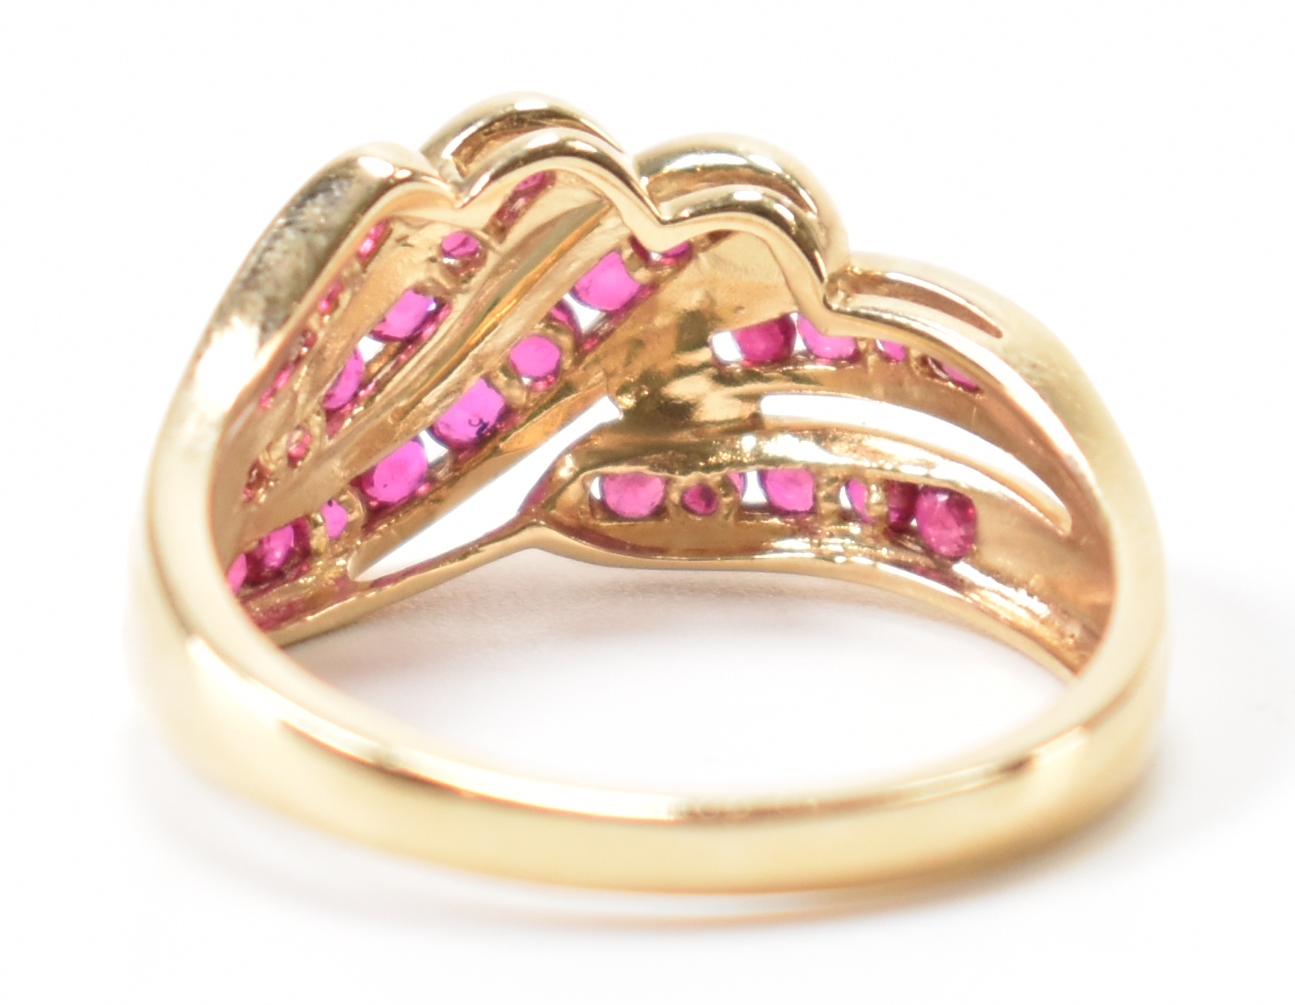 HALLMARKED 9CT GOLD & RUBY CROSSOVER RING - Image 3 of 8